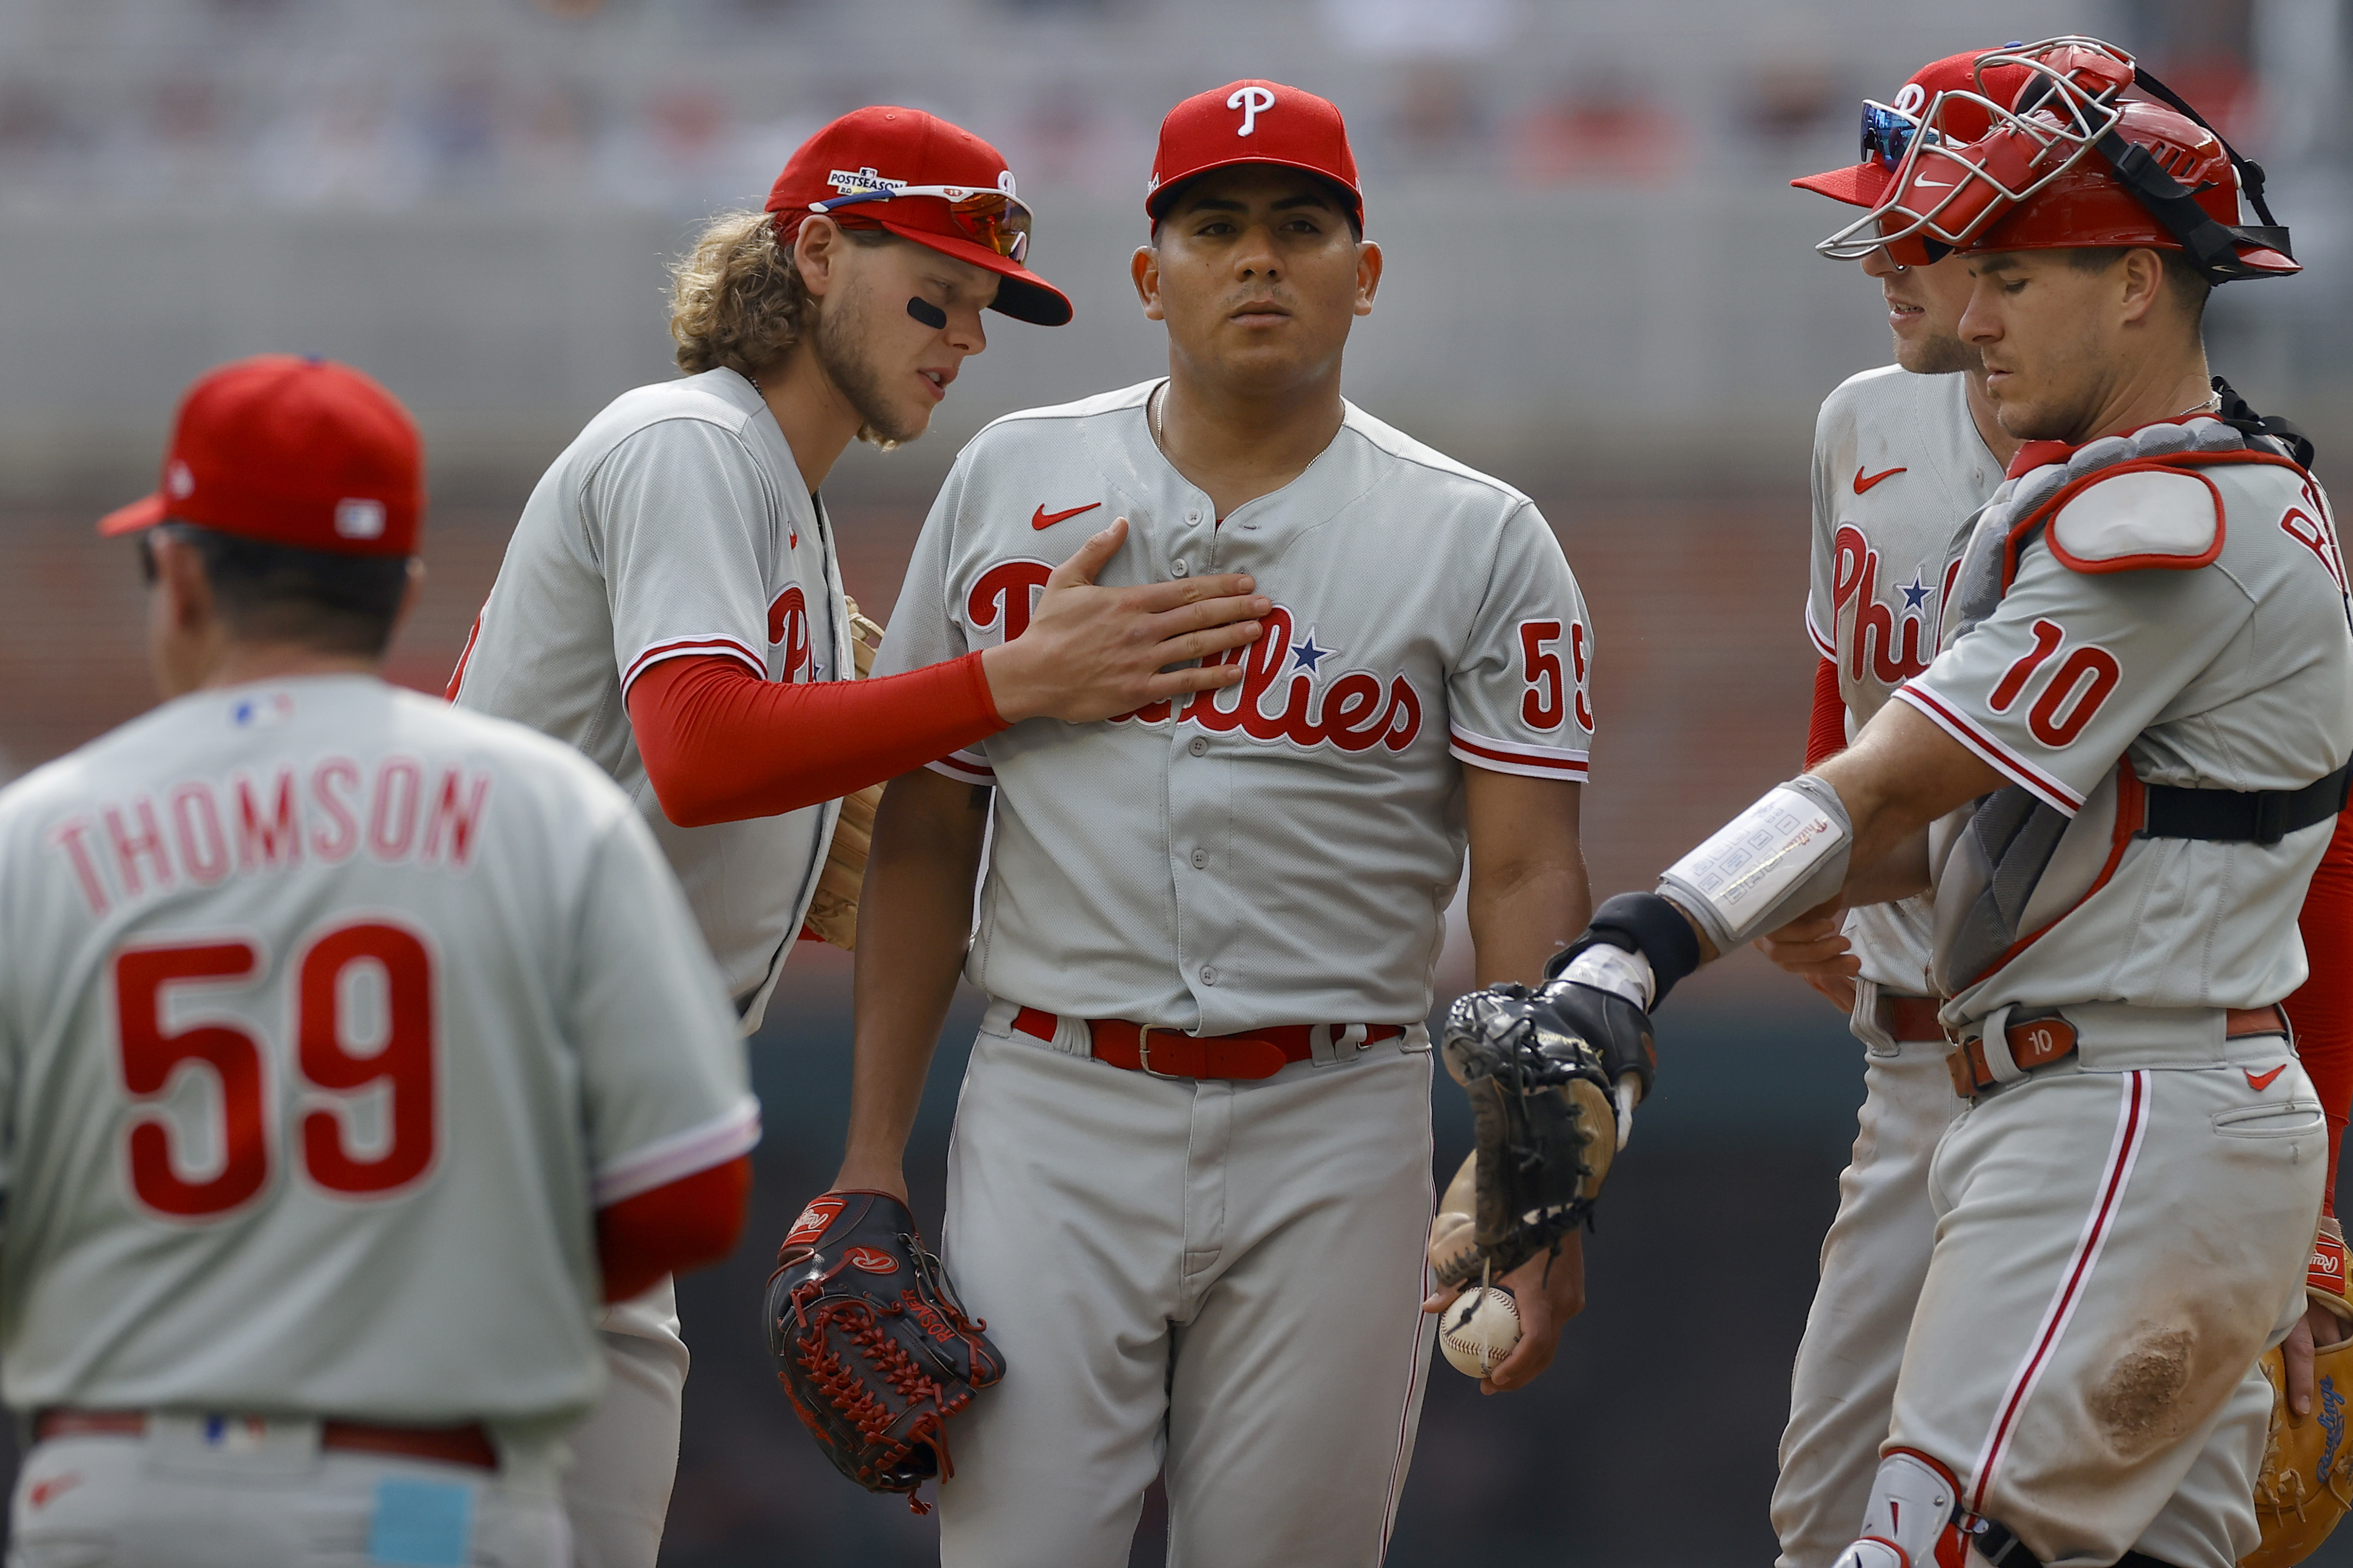 Phillies red uniforms will return for Dodgers, Giants series – NBC